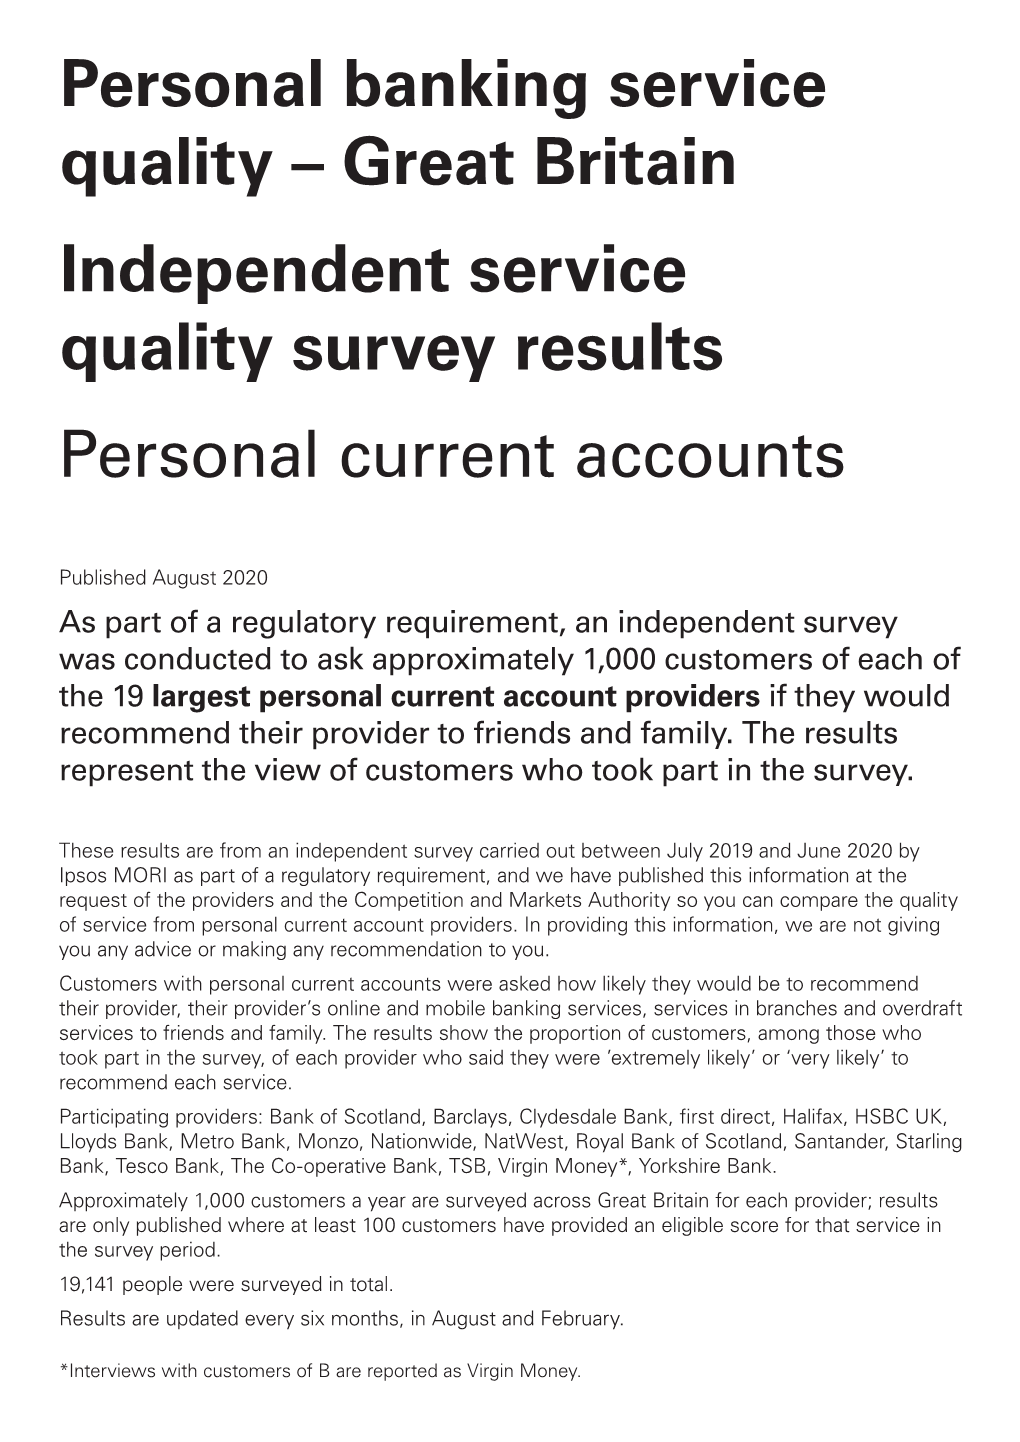 Personal Banking Service Quality – Great Britain Independent Service Quality Survey Results Personal Current Accounts